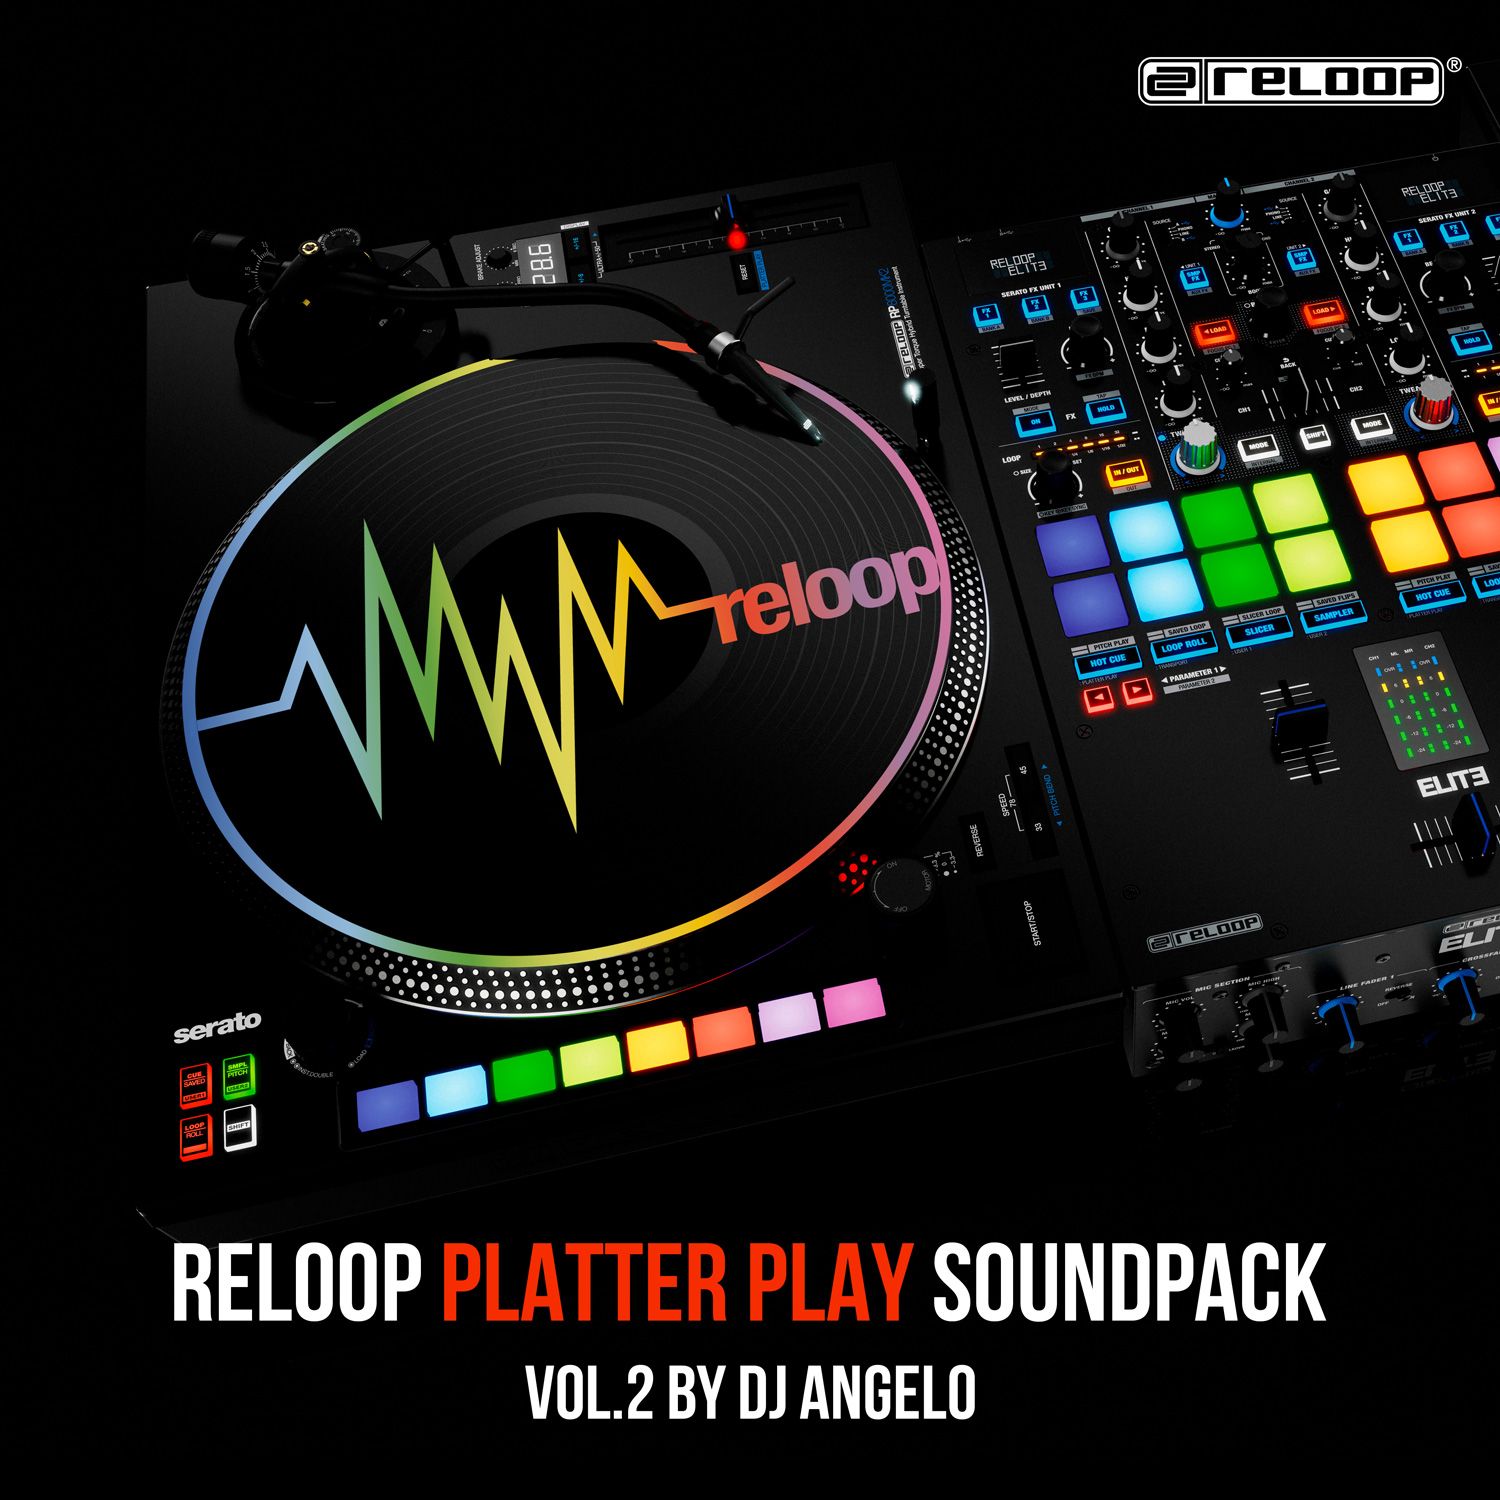 DJ ANGELO´s sound pack for the RP-8000 MK2